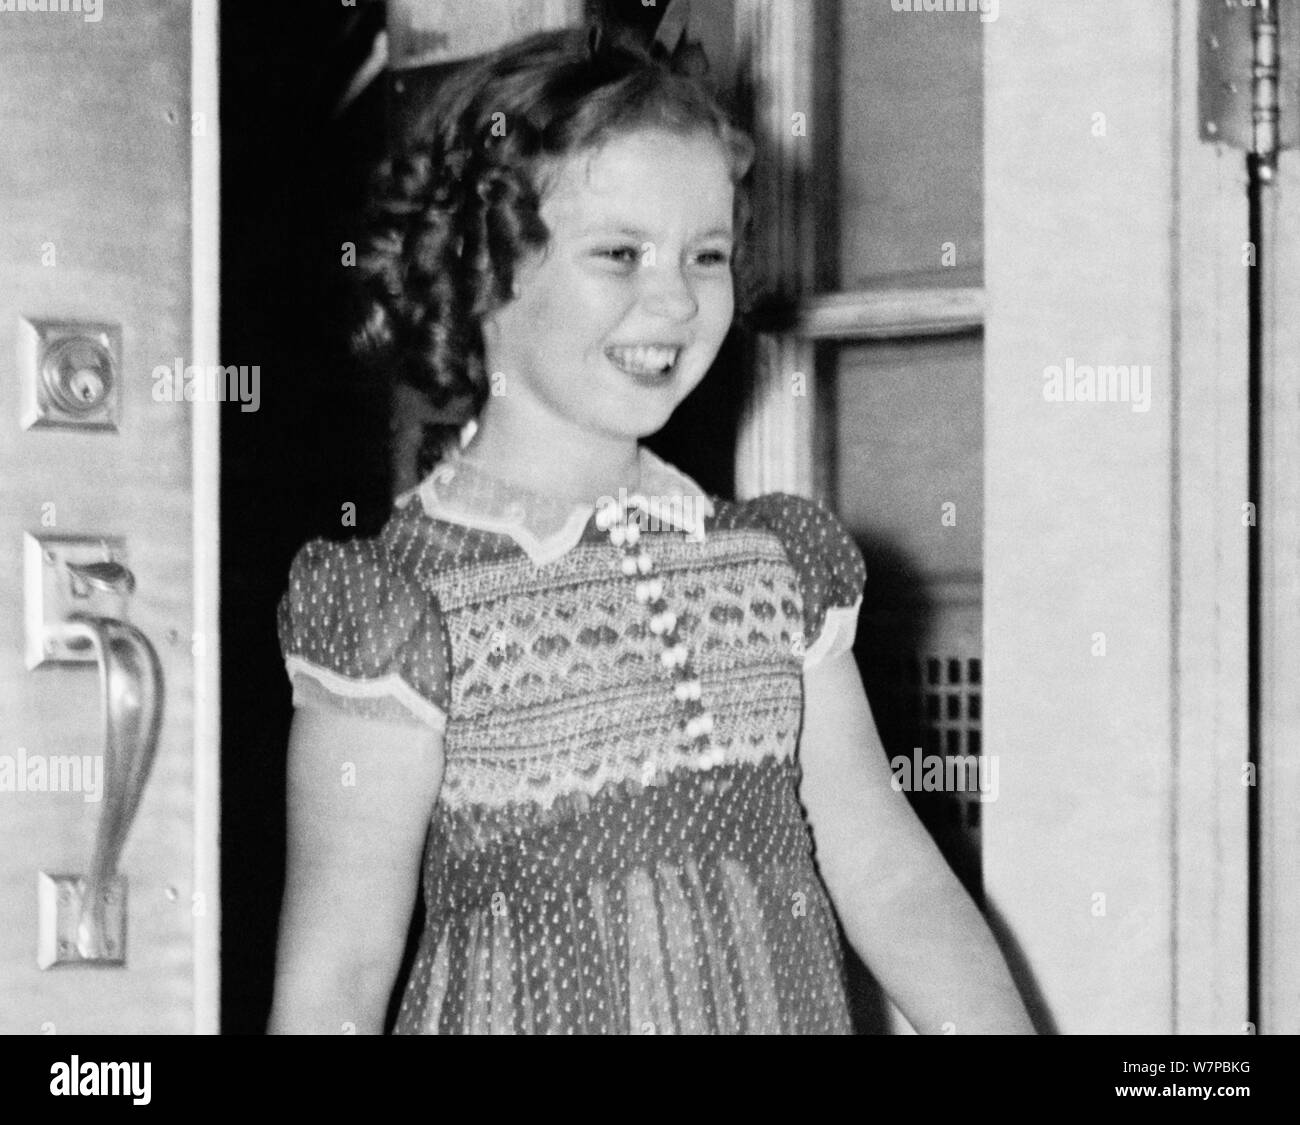 Vintage photo of American child film star Shirley Temple (1928 – 2014). The image was captured on June 24 1938 as the young actress left the White House following a meeting with US President Franklin D Roosevelt. During their conversation she told the President how she had lost a tooth the night before when it fell out as she ate a sandwich. Stock Photo